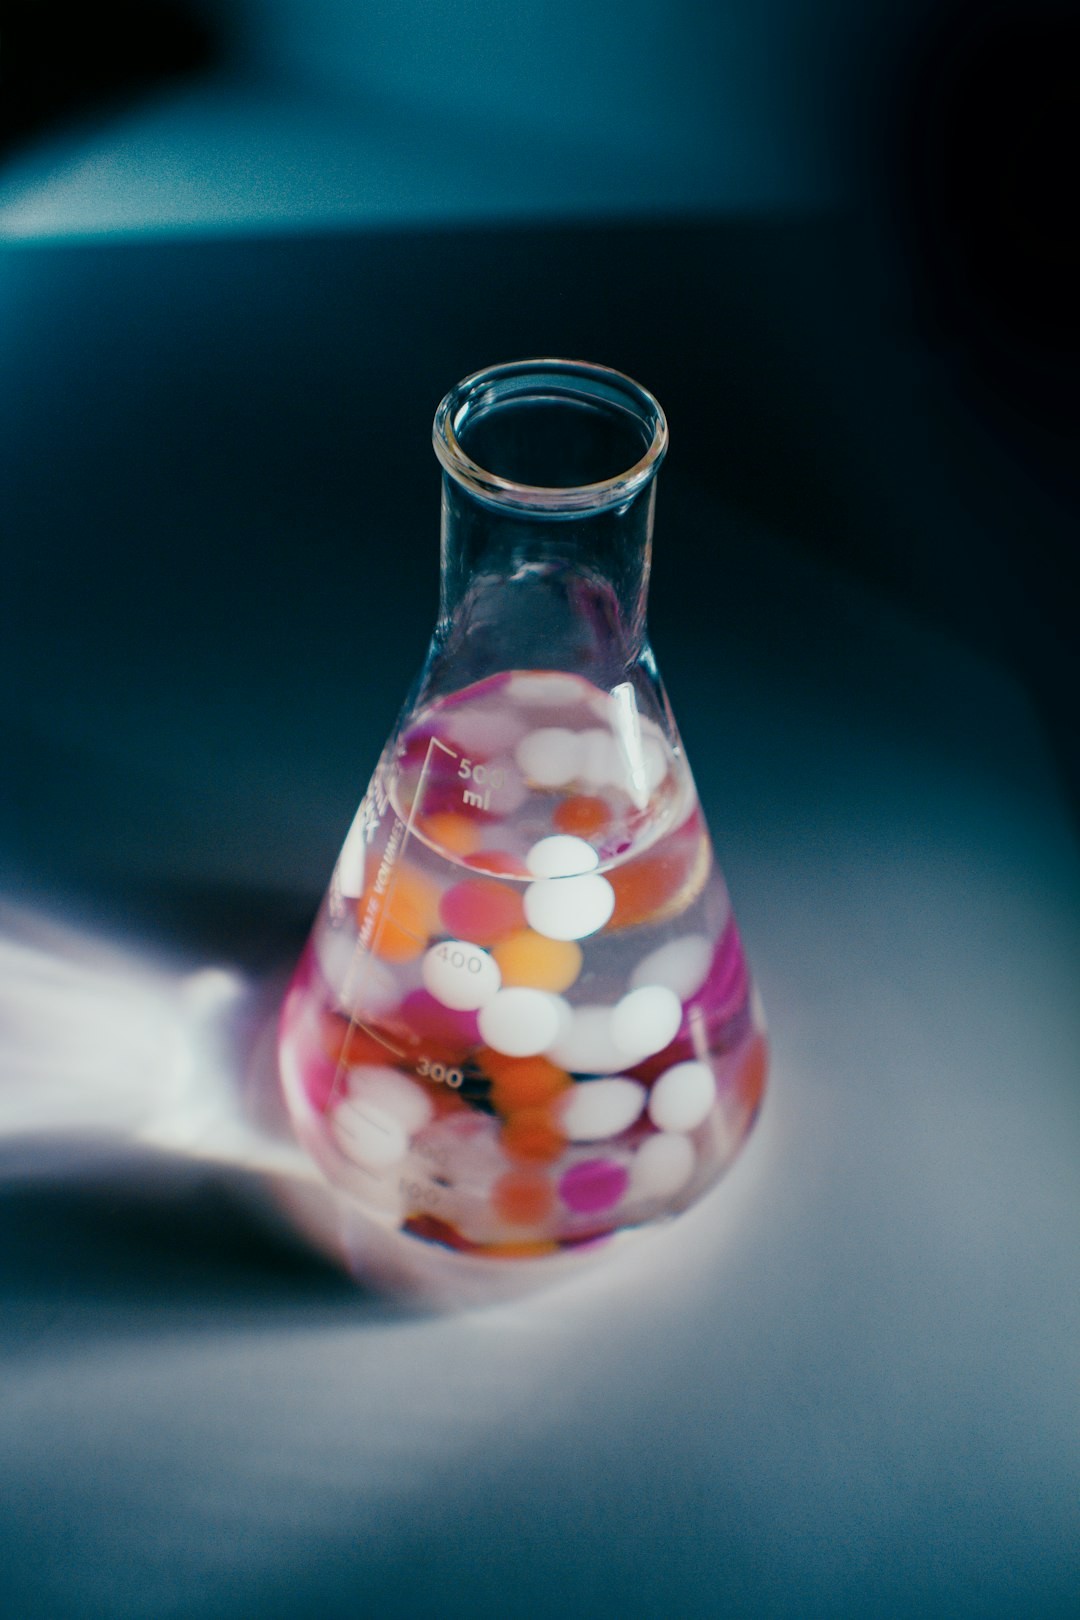 Erlenmeyer flask filled with red, orange and white particles on lab